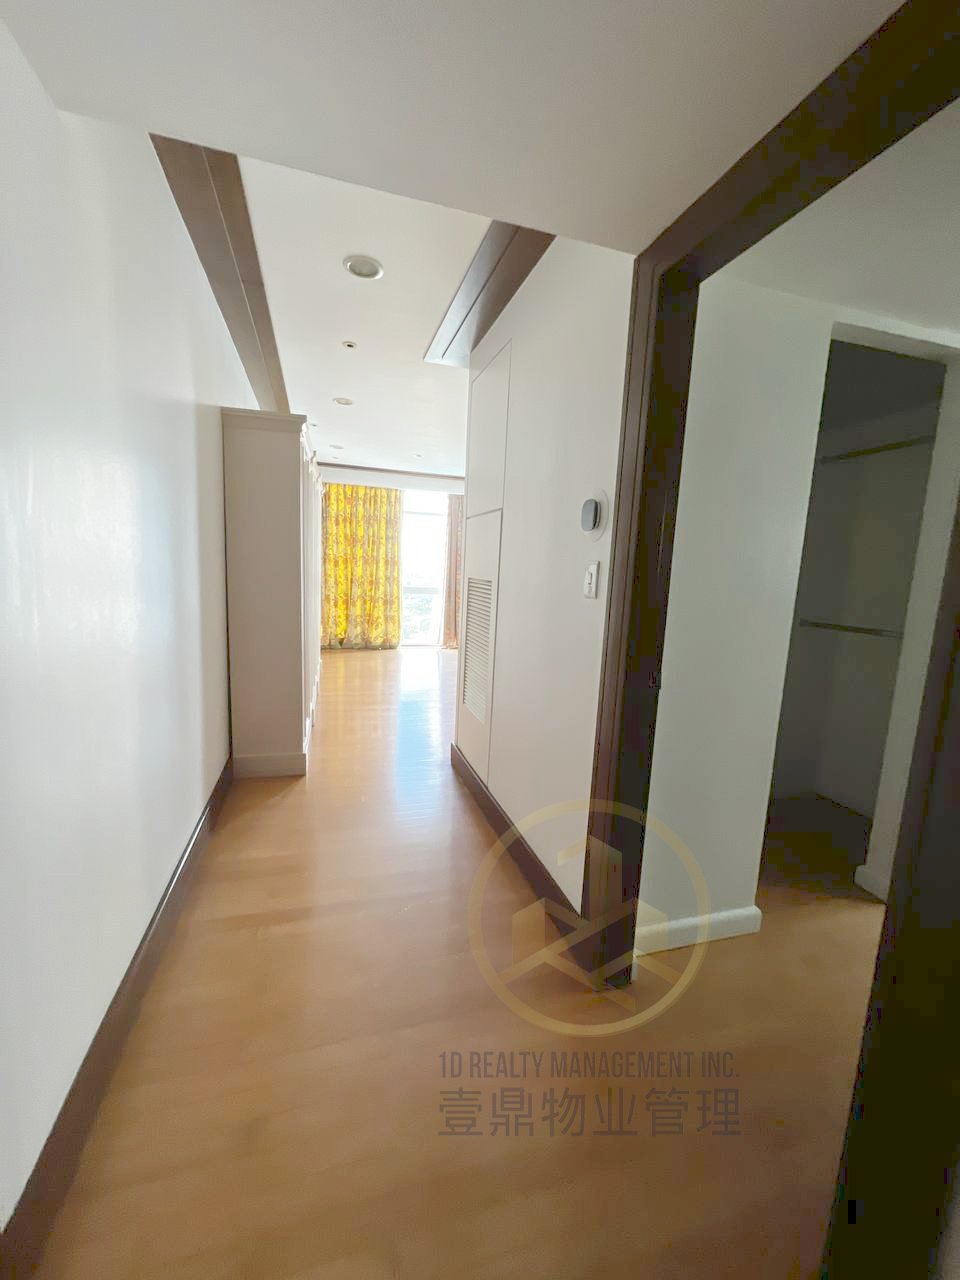 FOR LEASE 3BR - Pacific Plaza Towers - West, Crescent Park Residences, 4th Ave, Taguig